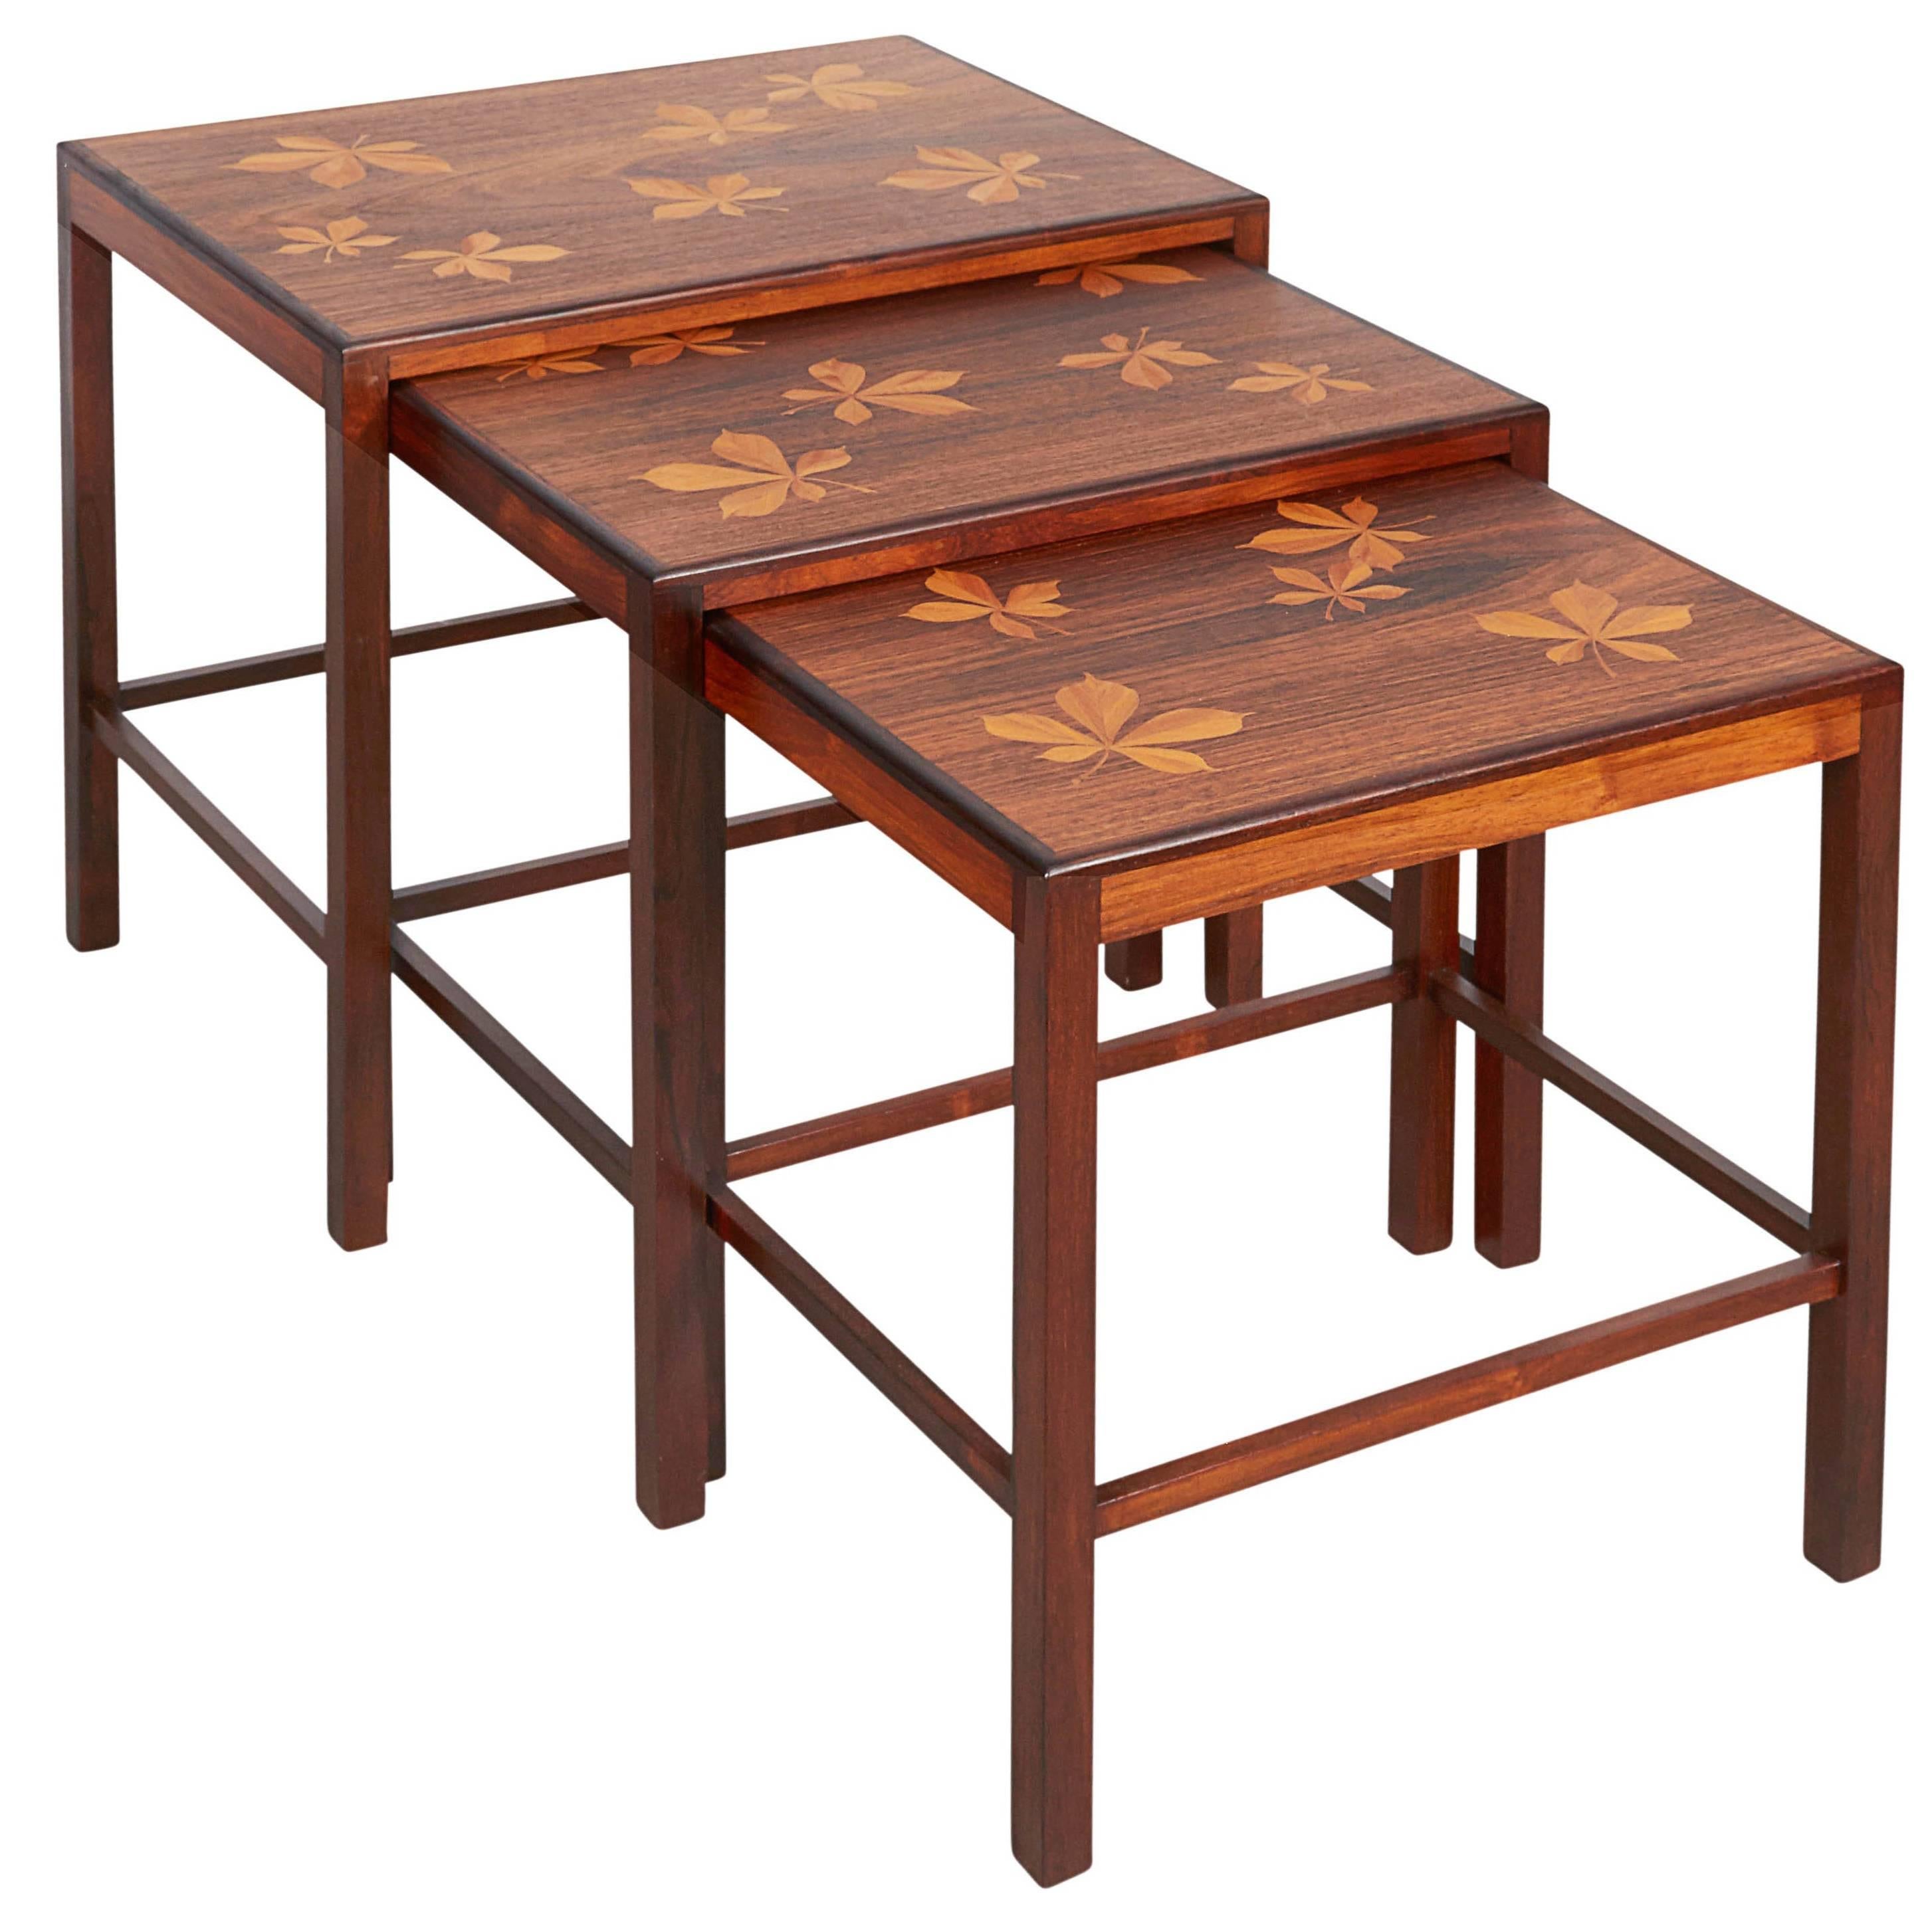 Rosewood Nesting Tables with Chestnut Inlay